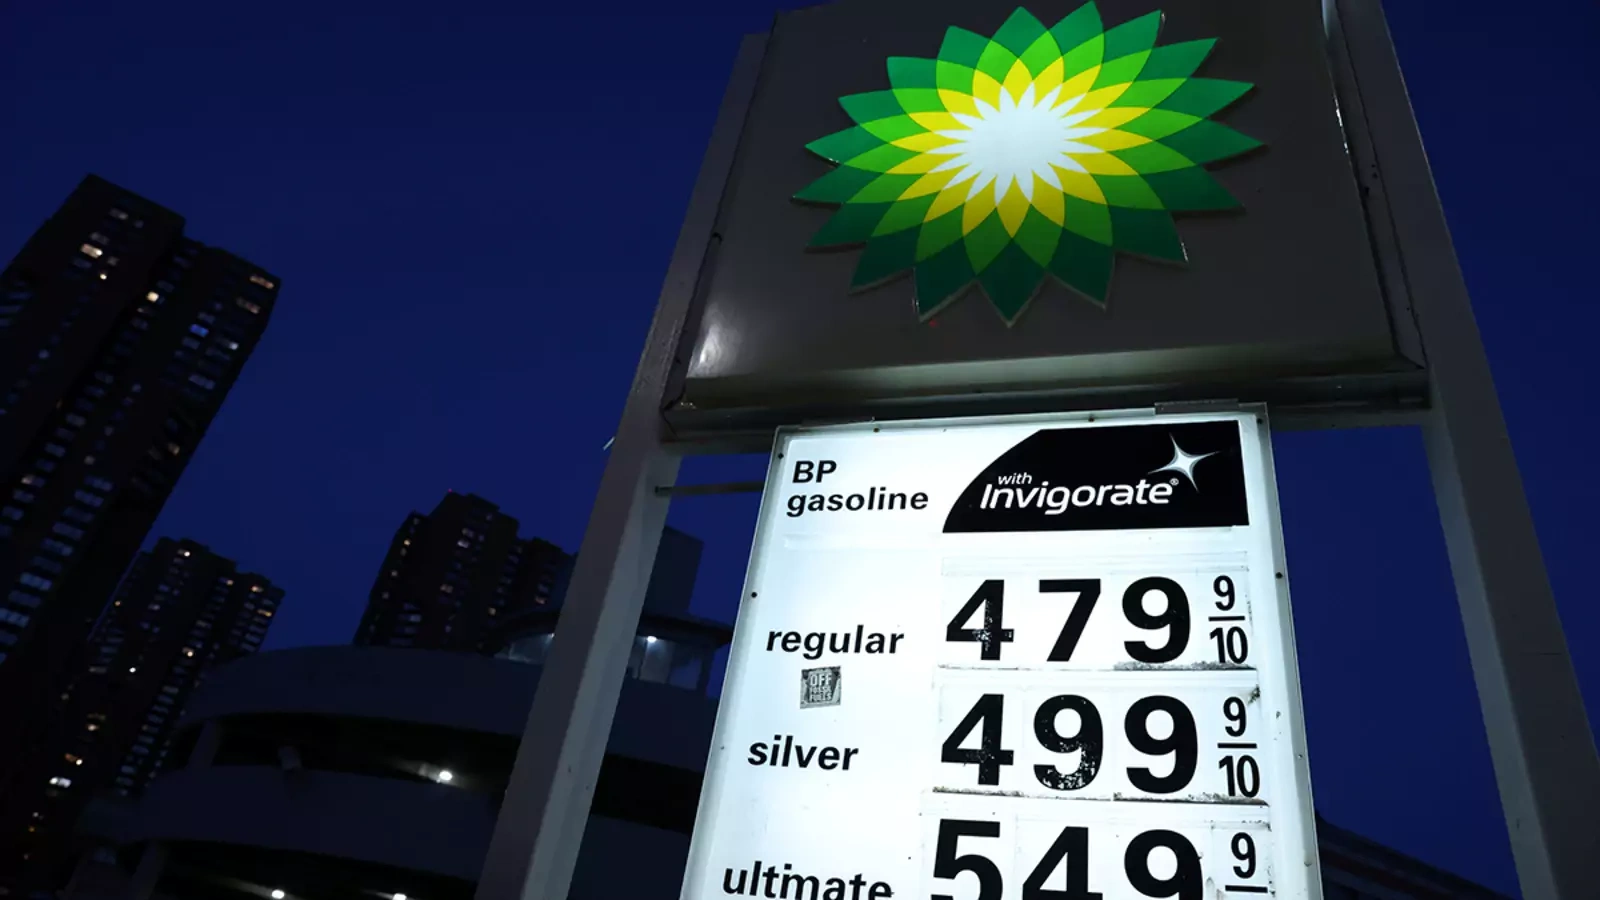 Prices are seen displayed at a BP gas station in New York City in November 2021.